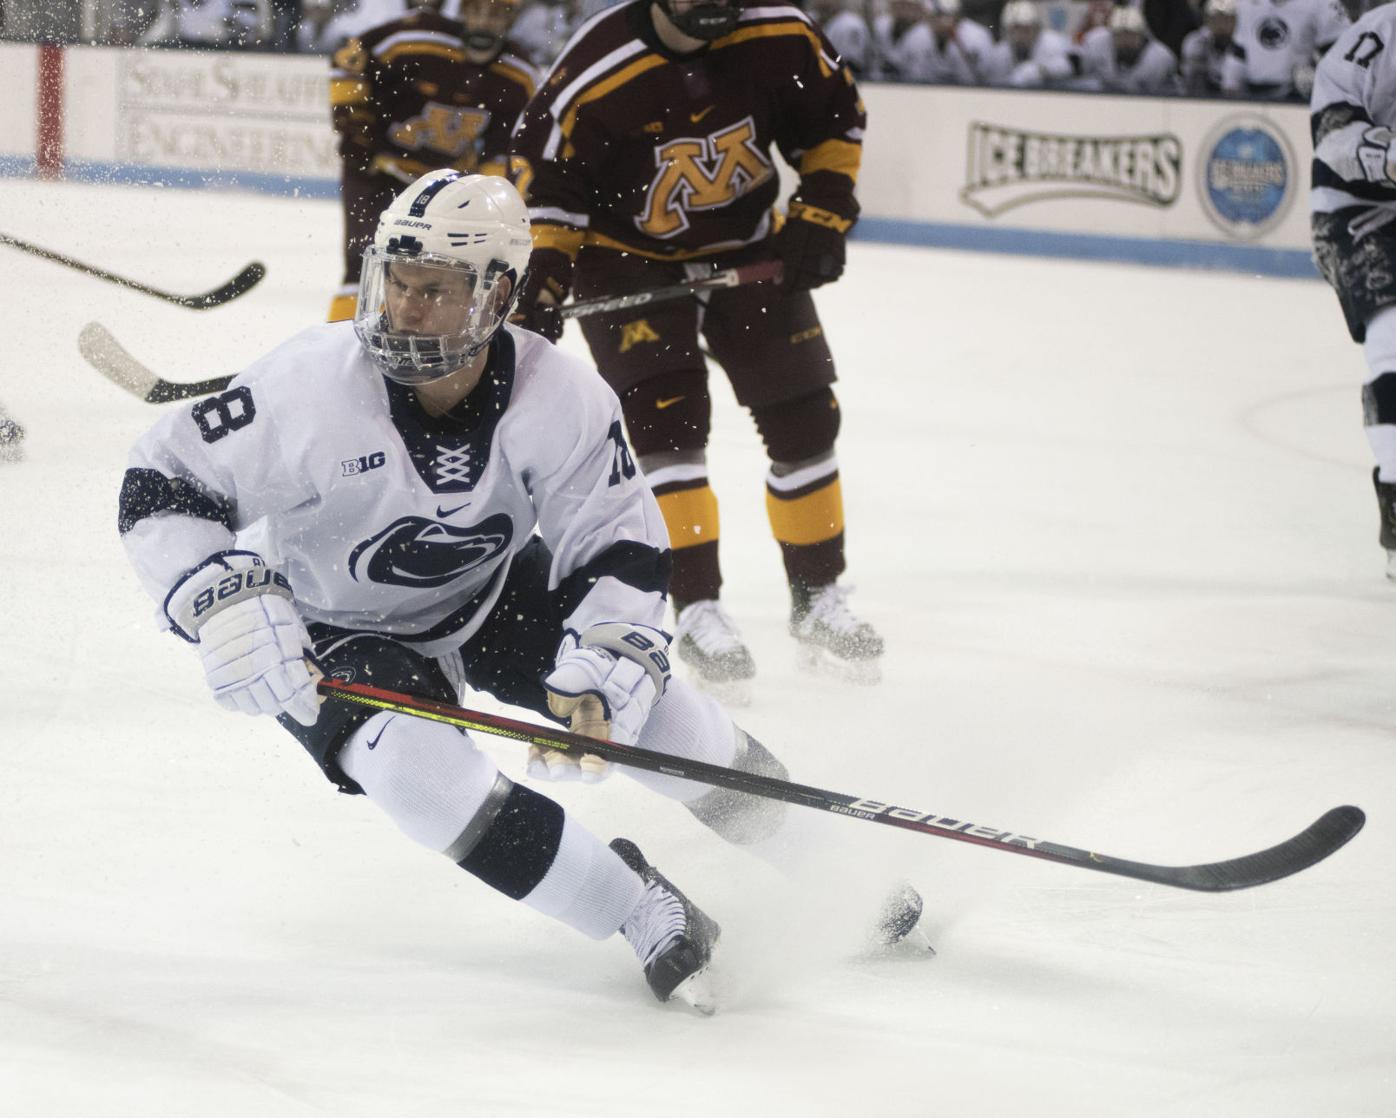 Penn State Women's Hockey Completes Comeback For 5-3 Victory Over